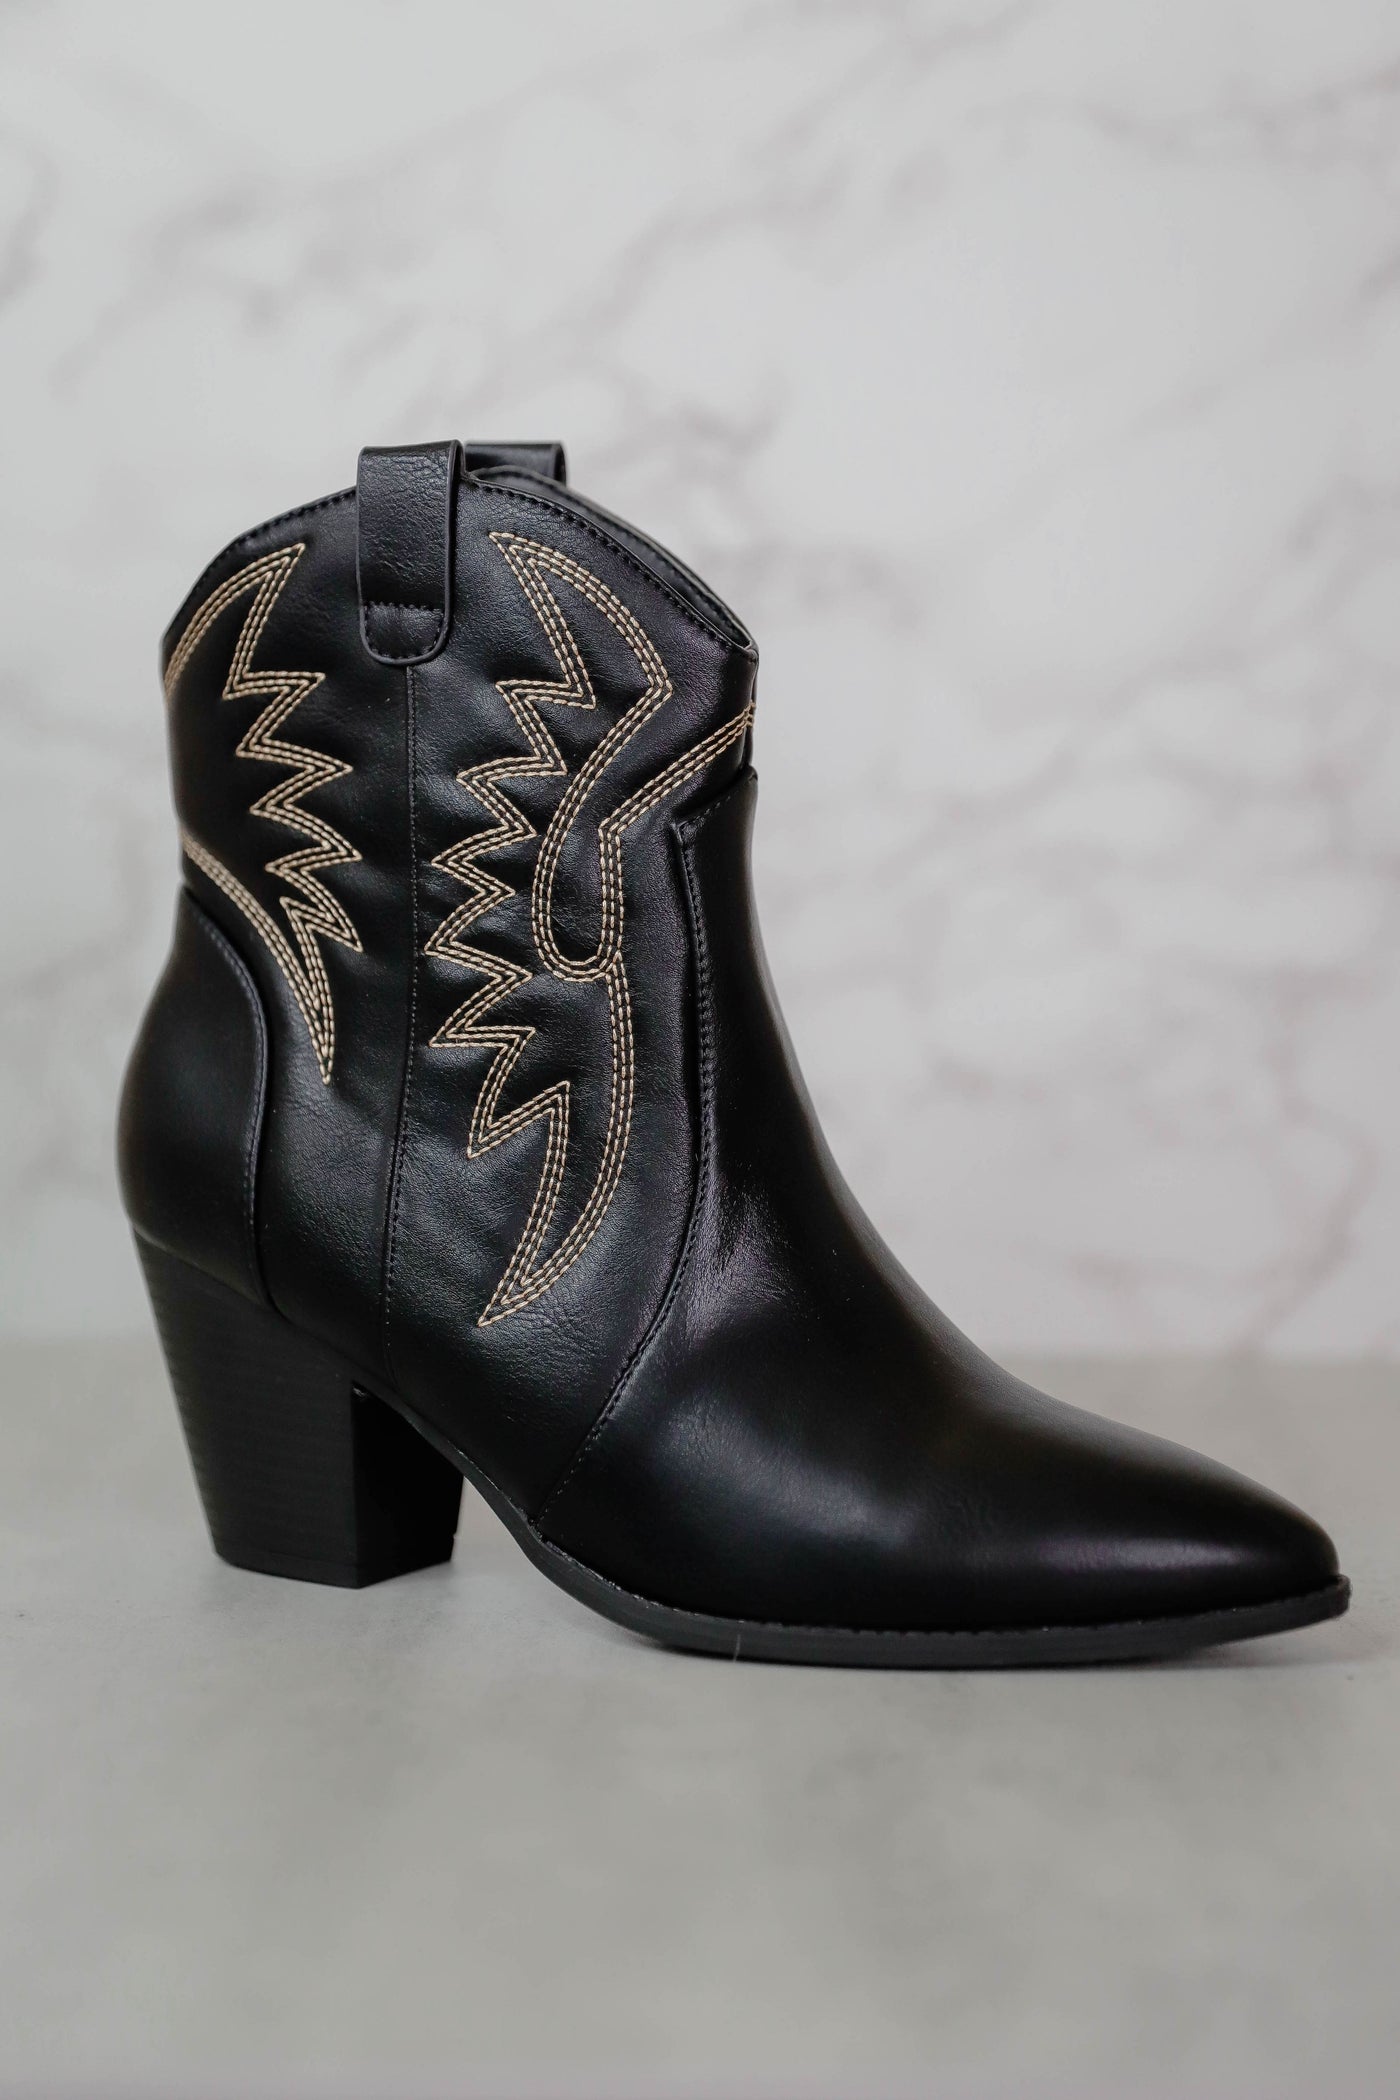 Black Western Booties- Women's Cowboy Booties-Affordable Women's Boots